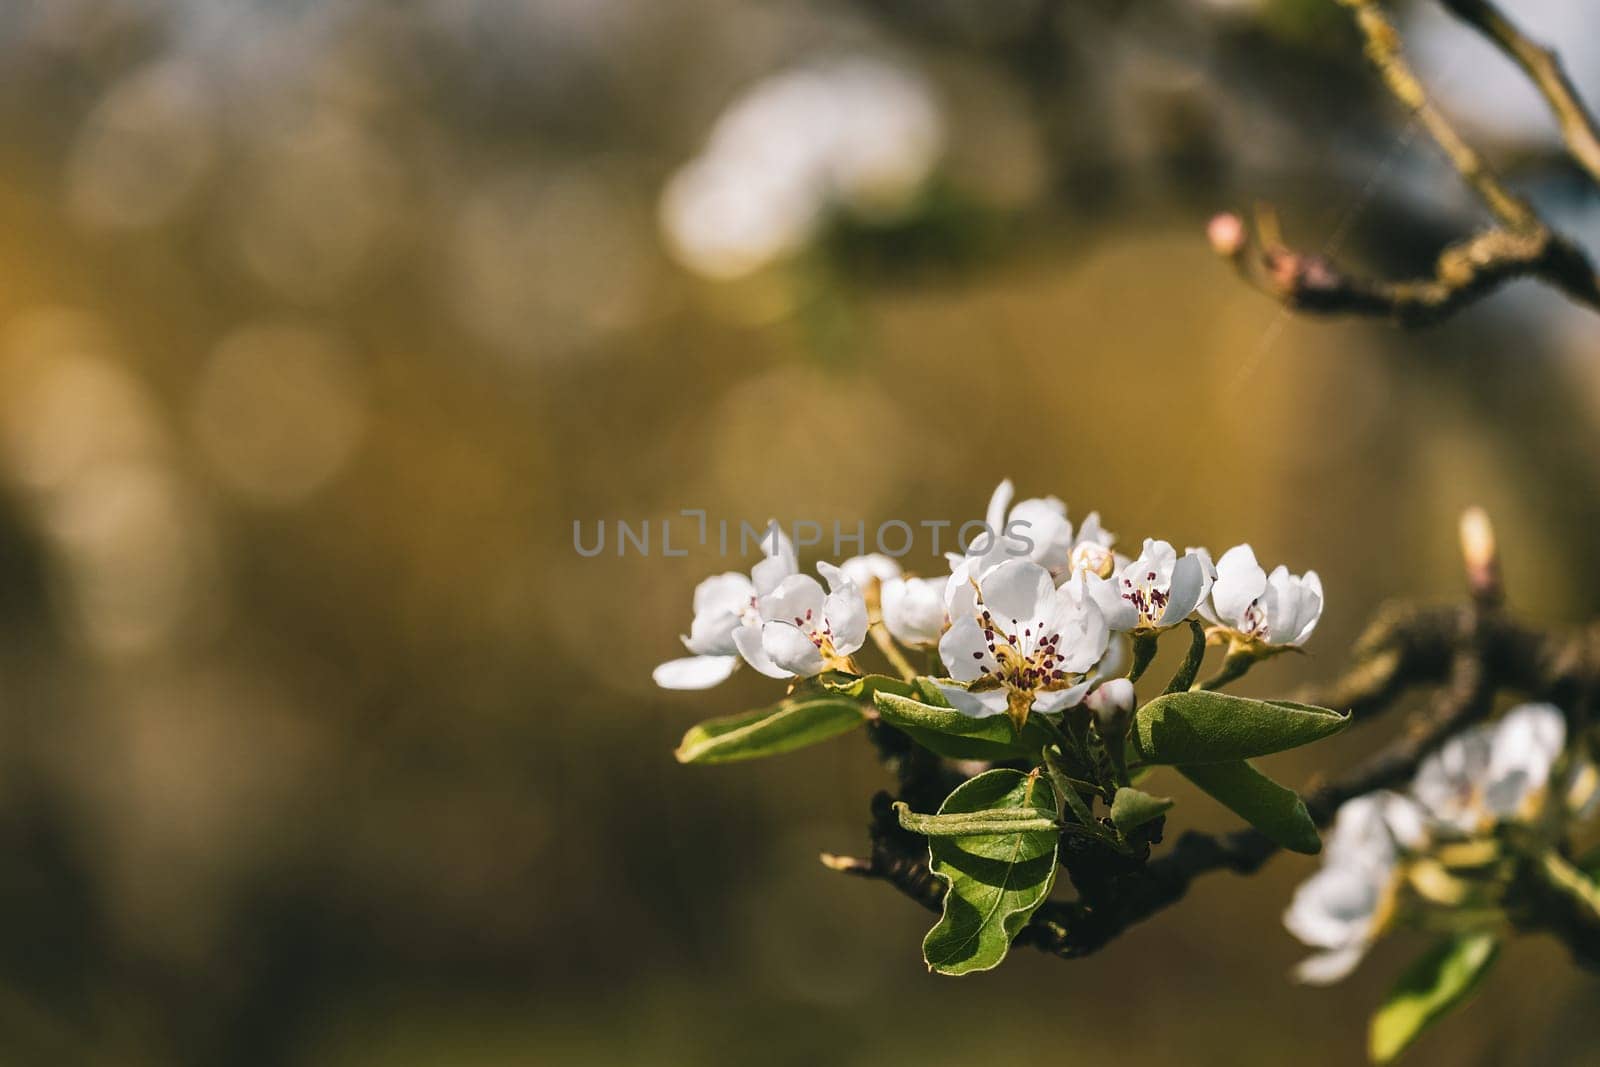 A close up of a white flower with a green stem. The flower is surrounded by leaves and the background is blurry. Concept of serenity and calmness